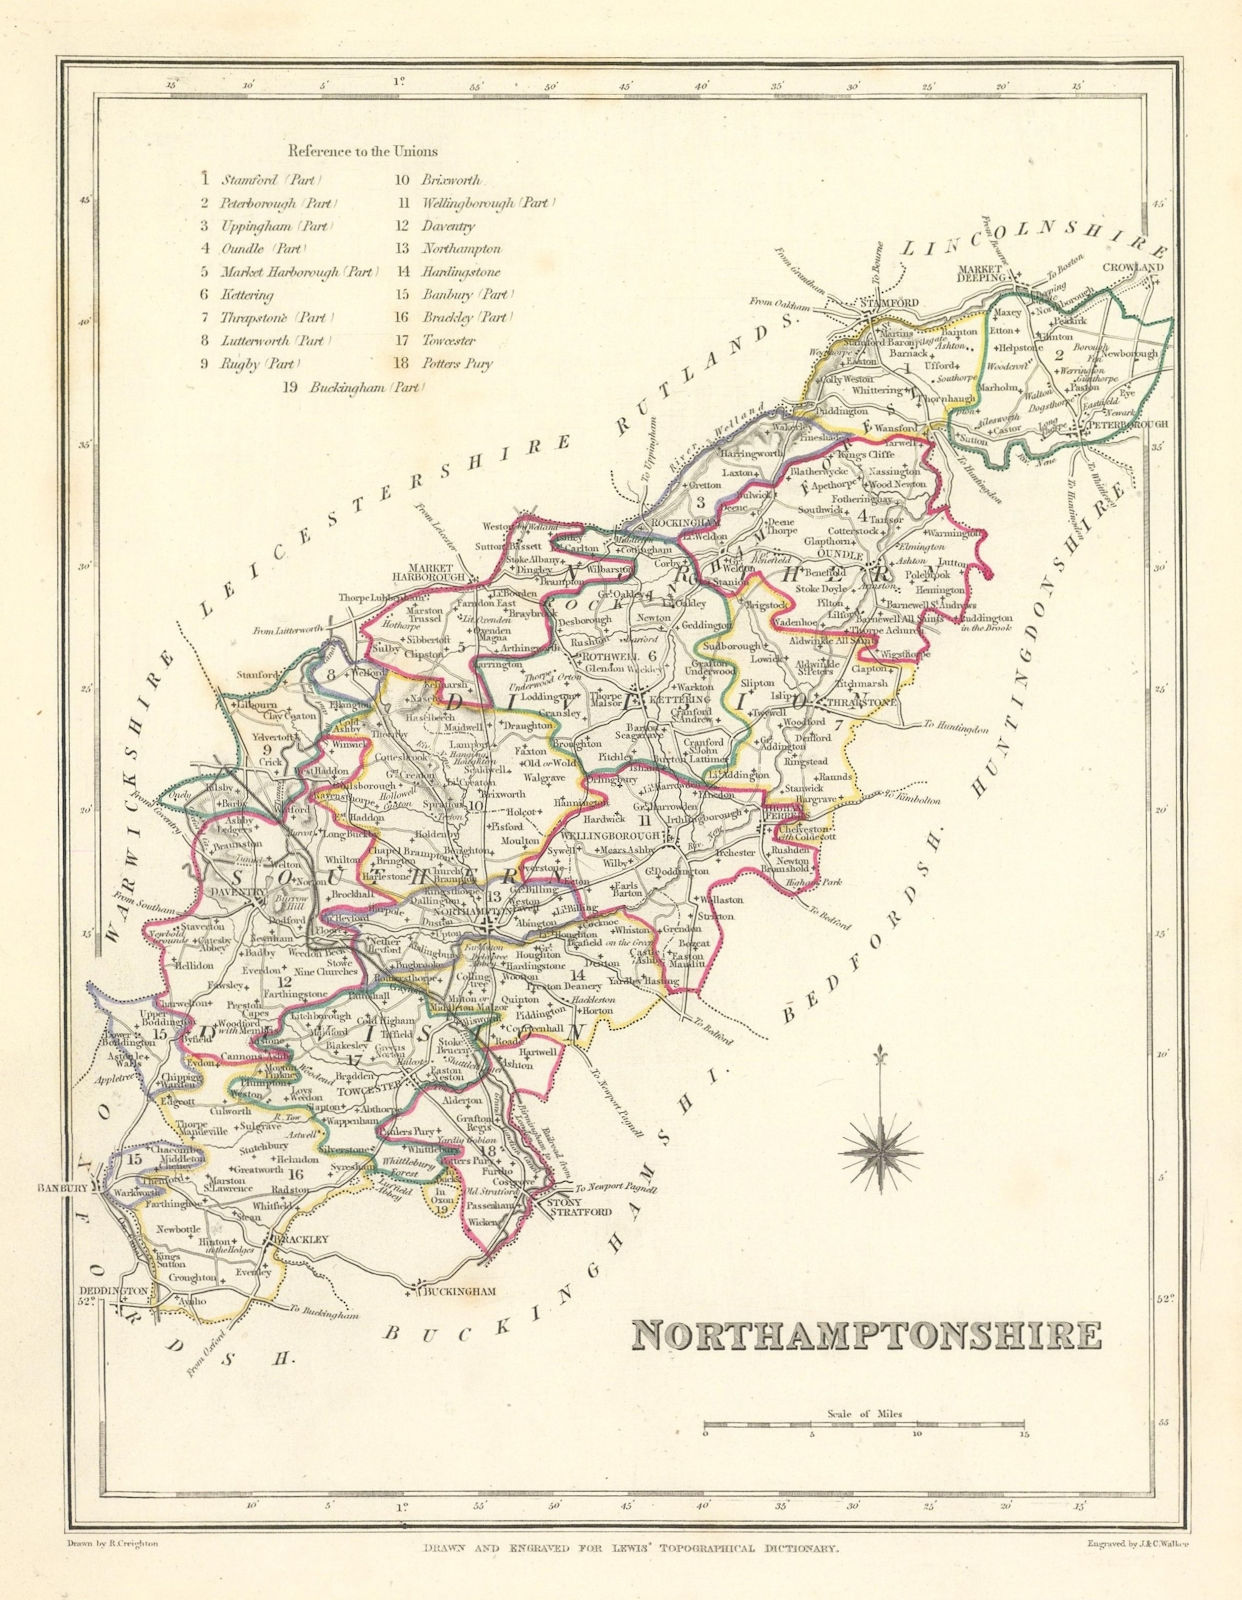 Associate Product Antique county map of NORTHAMPTONSHIRE by Creighton & Walker for Lewis c1840